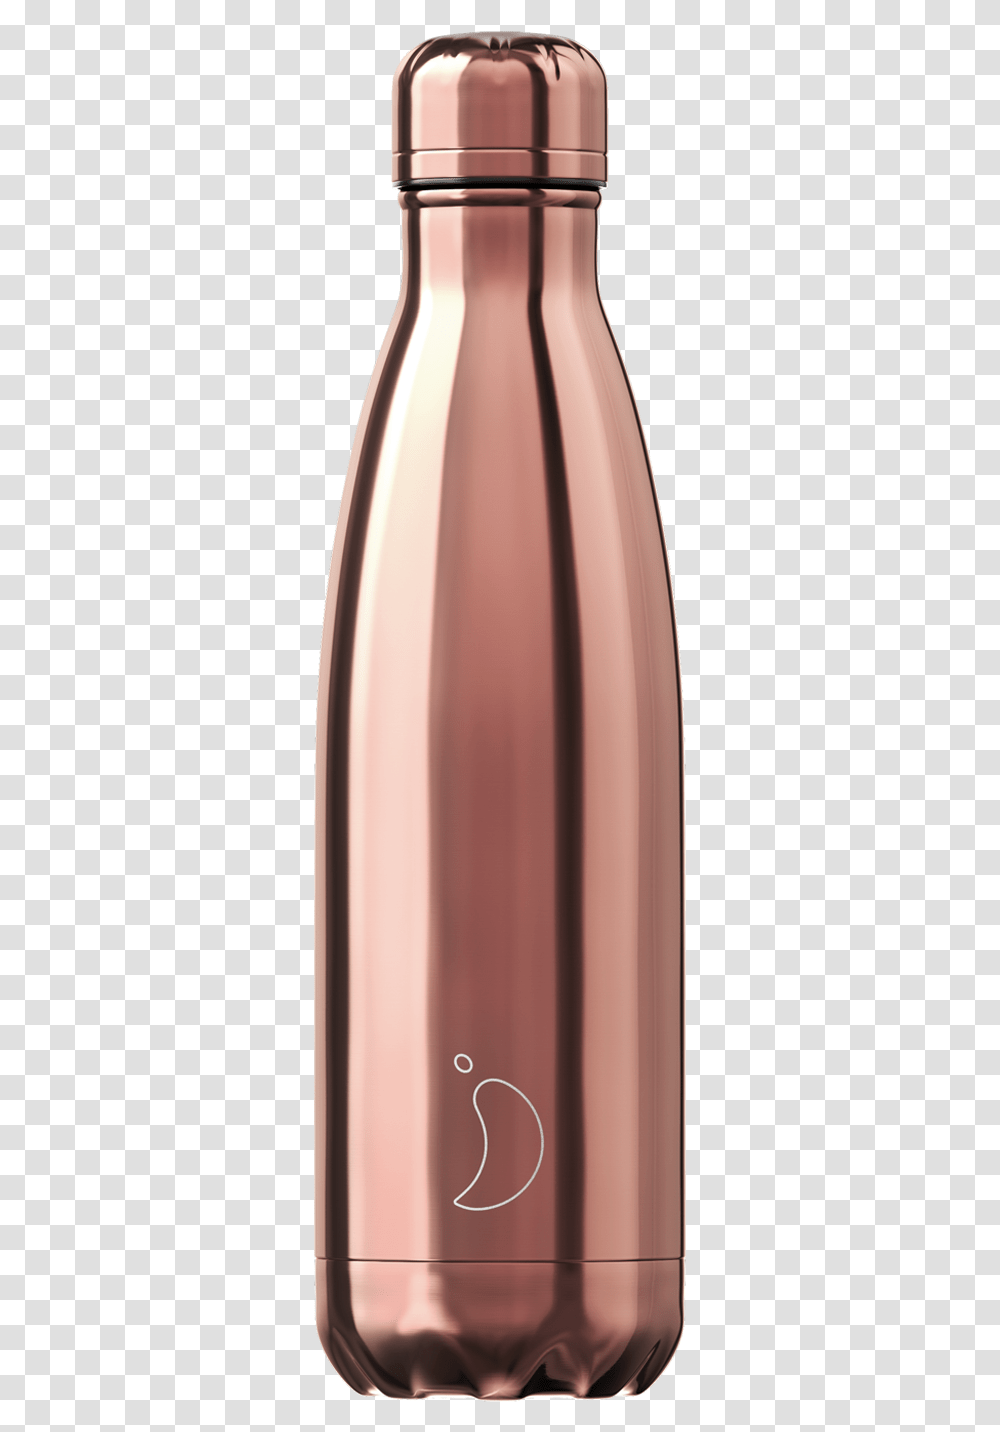 Chilly Bottle Rose Gold, Beverage, Drink, Alcohol, Cosmetics Transparent Png